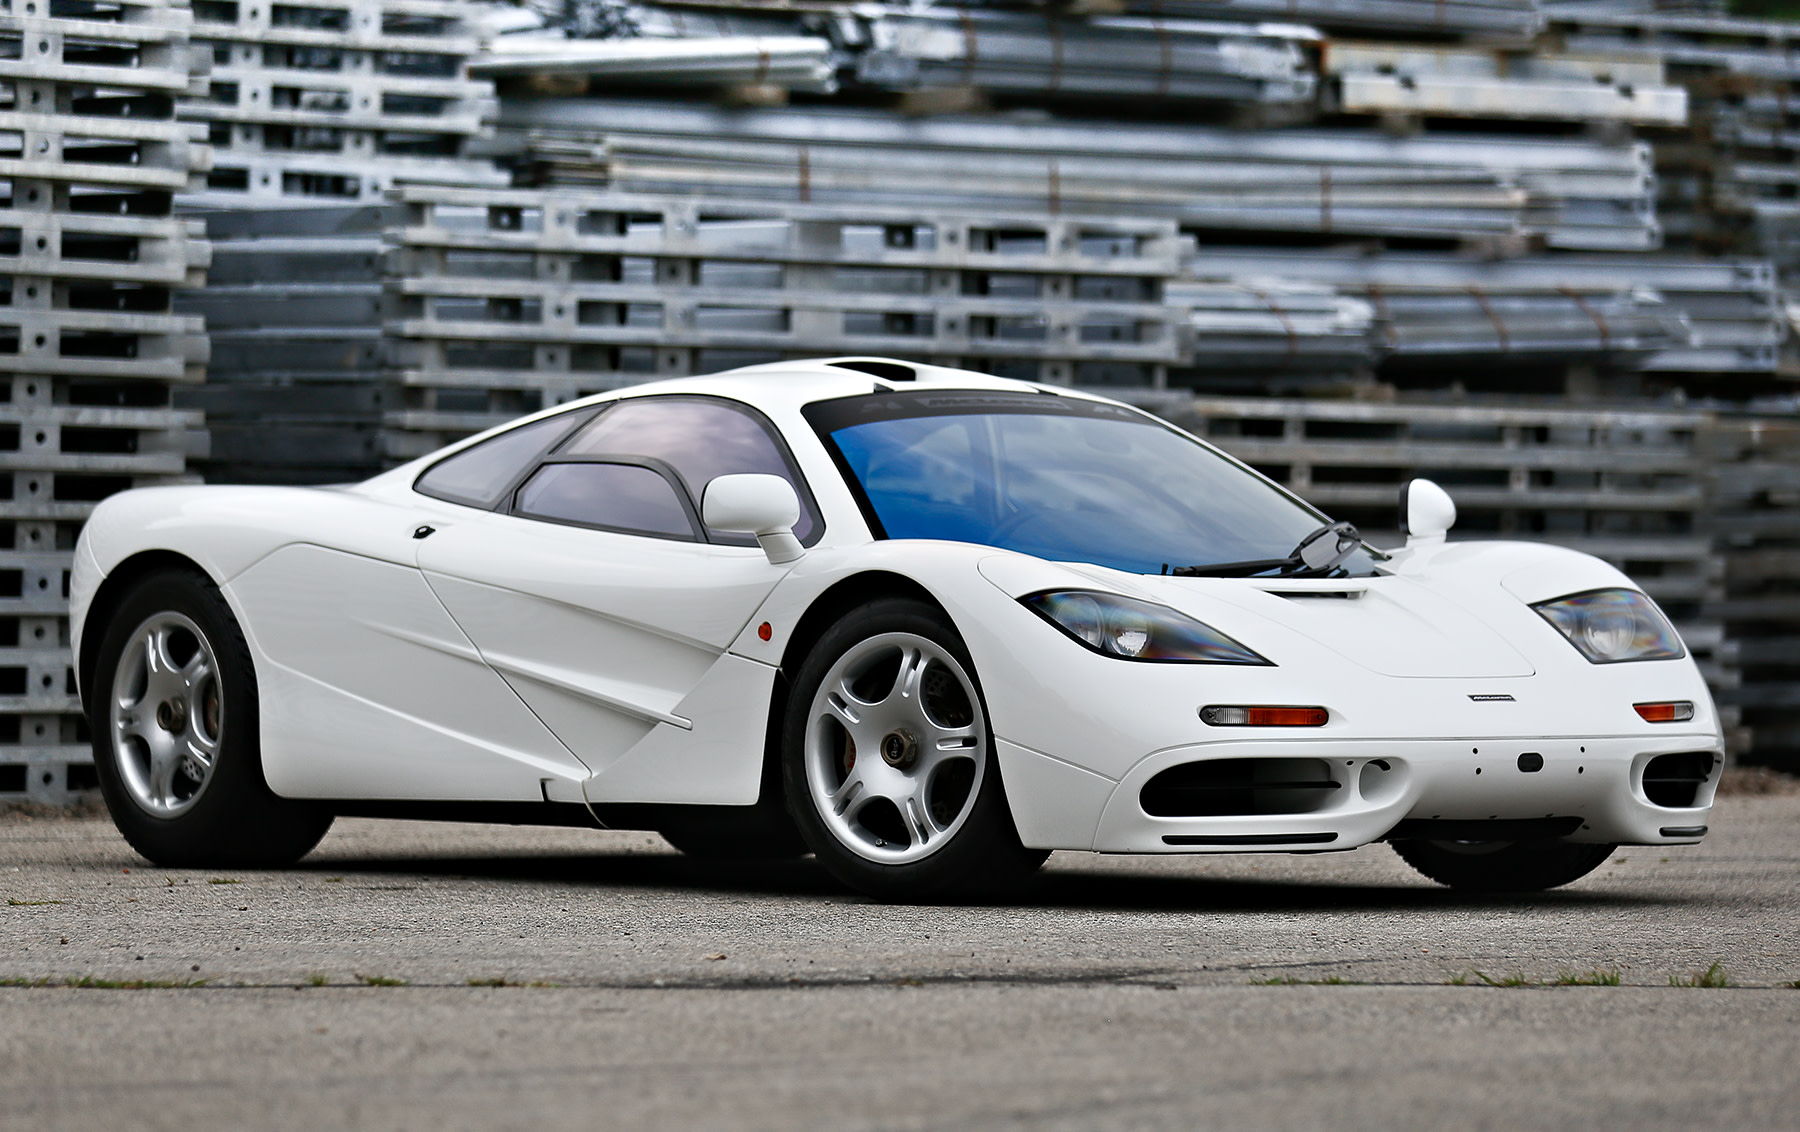 1995 McLaren F1 is the Most Expensive Car Sold at Auction This